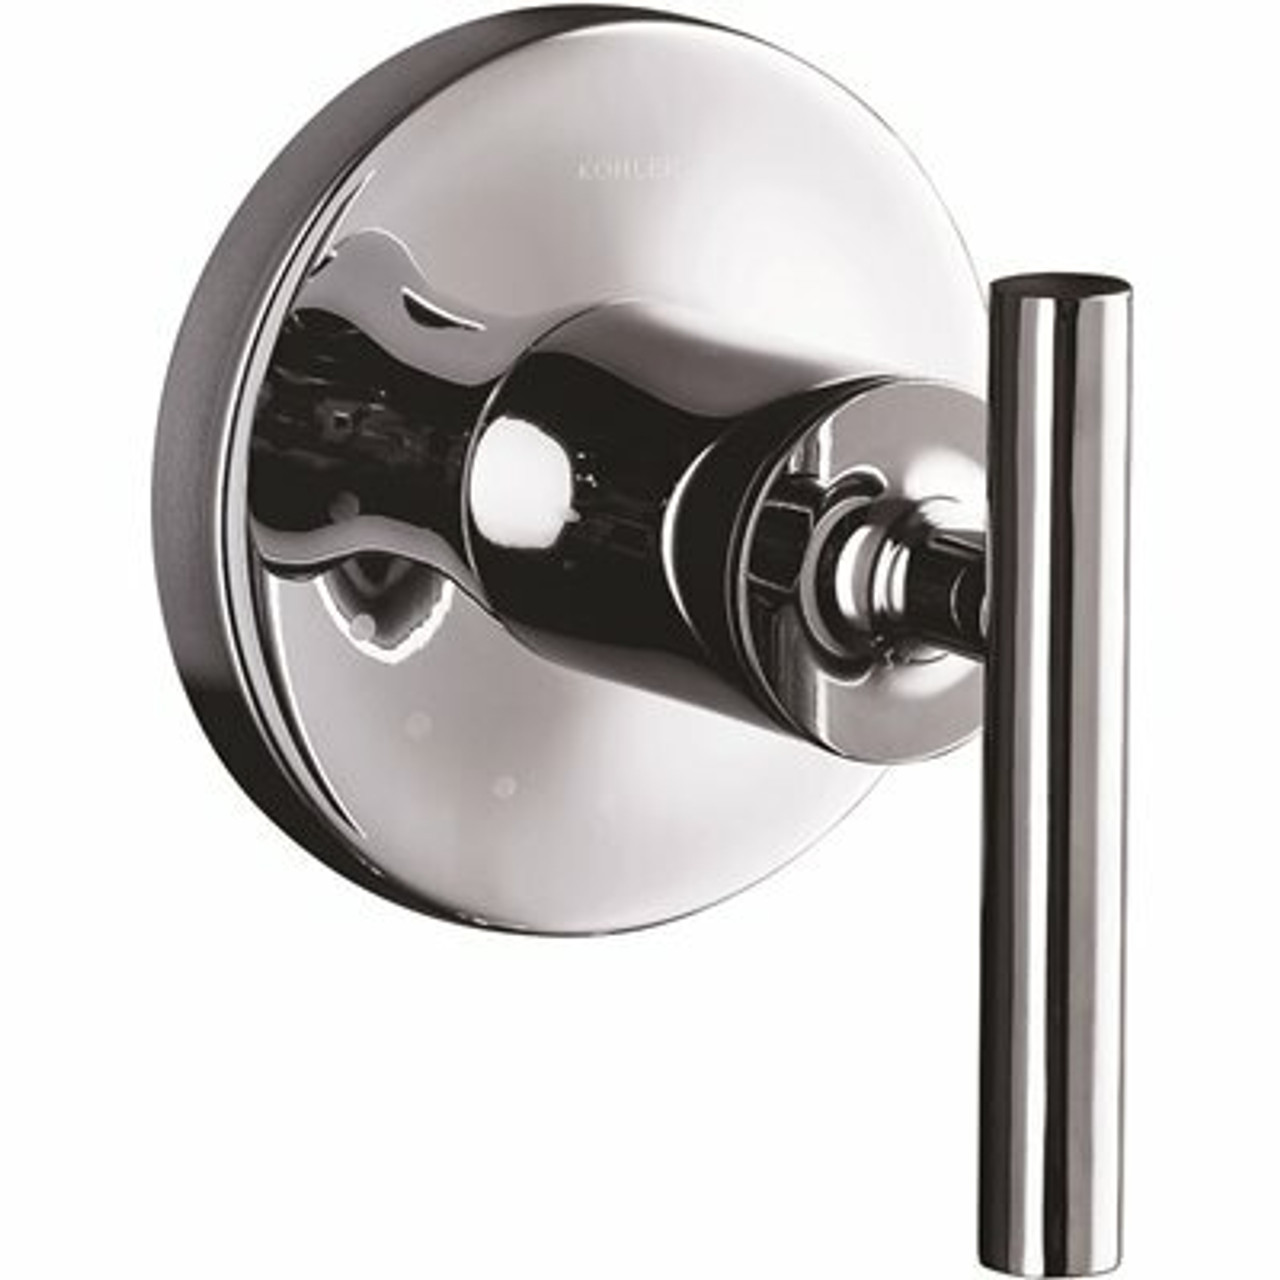 Kohler Purist 1-Handle Volume Control Valve Trim Kit With Lever Handle In Polished Chrome (Valve Not Included)